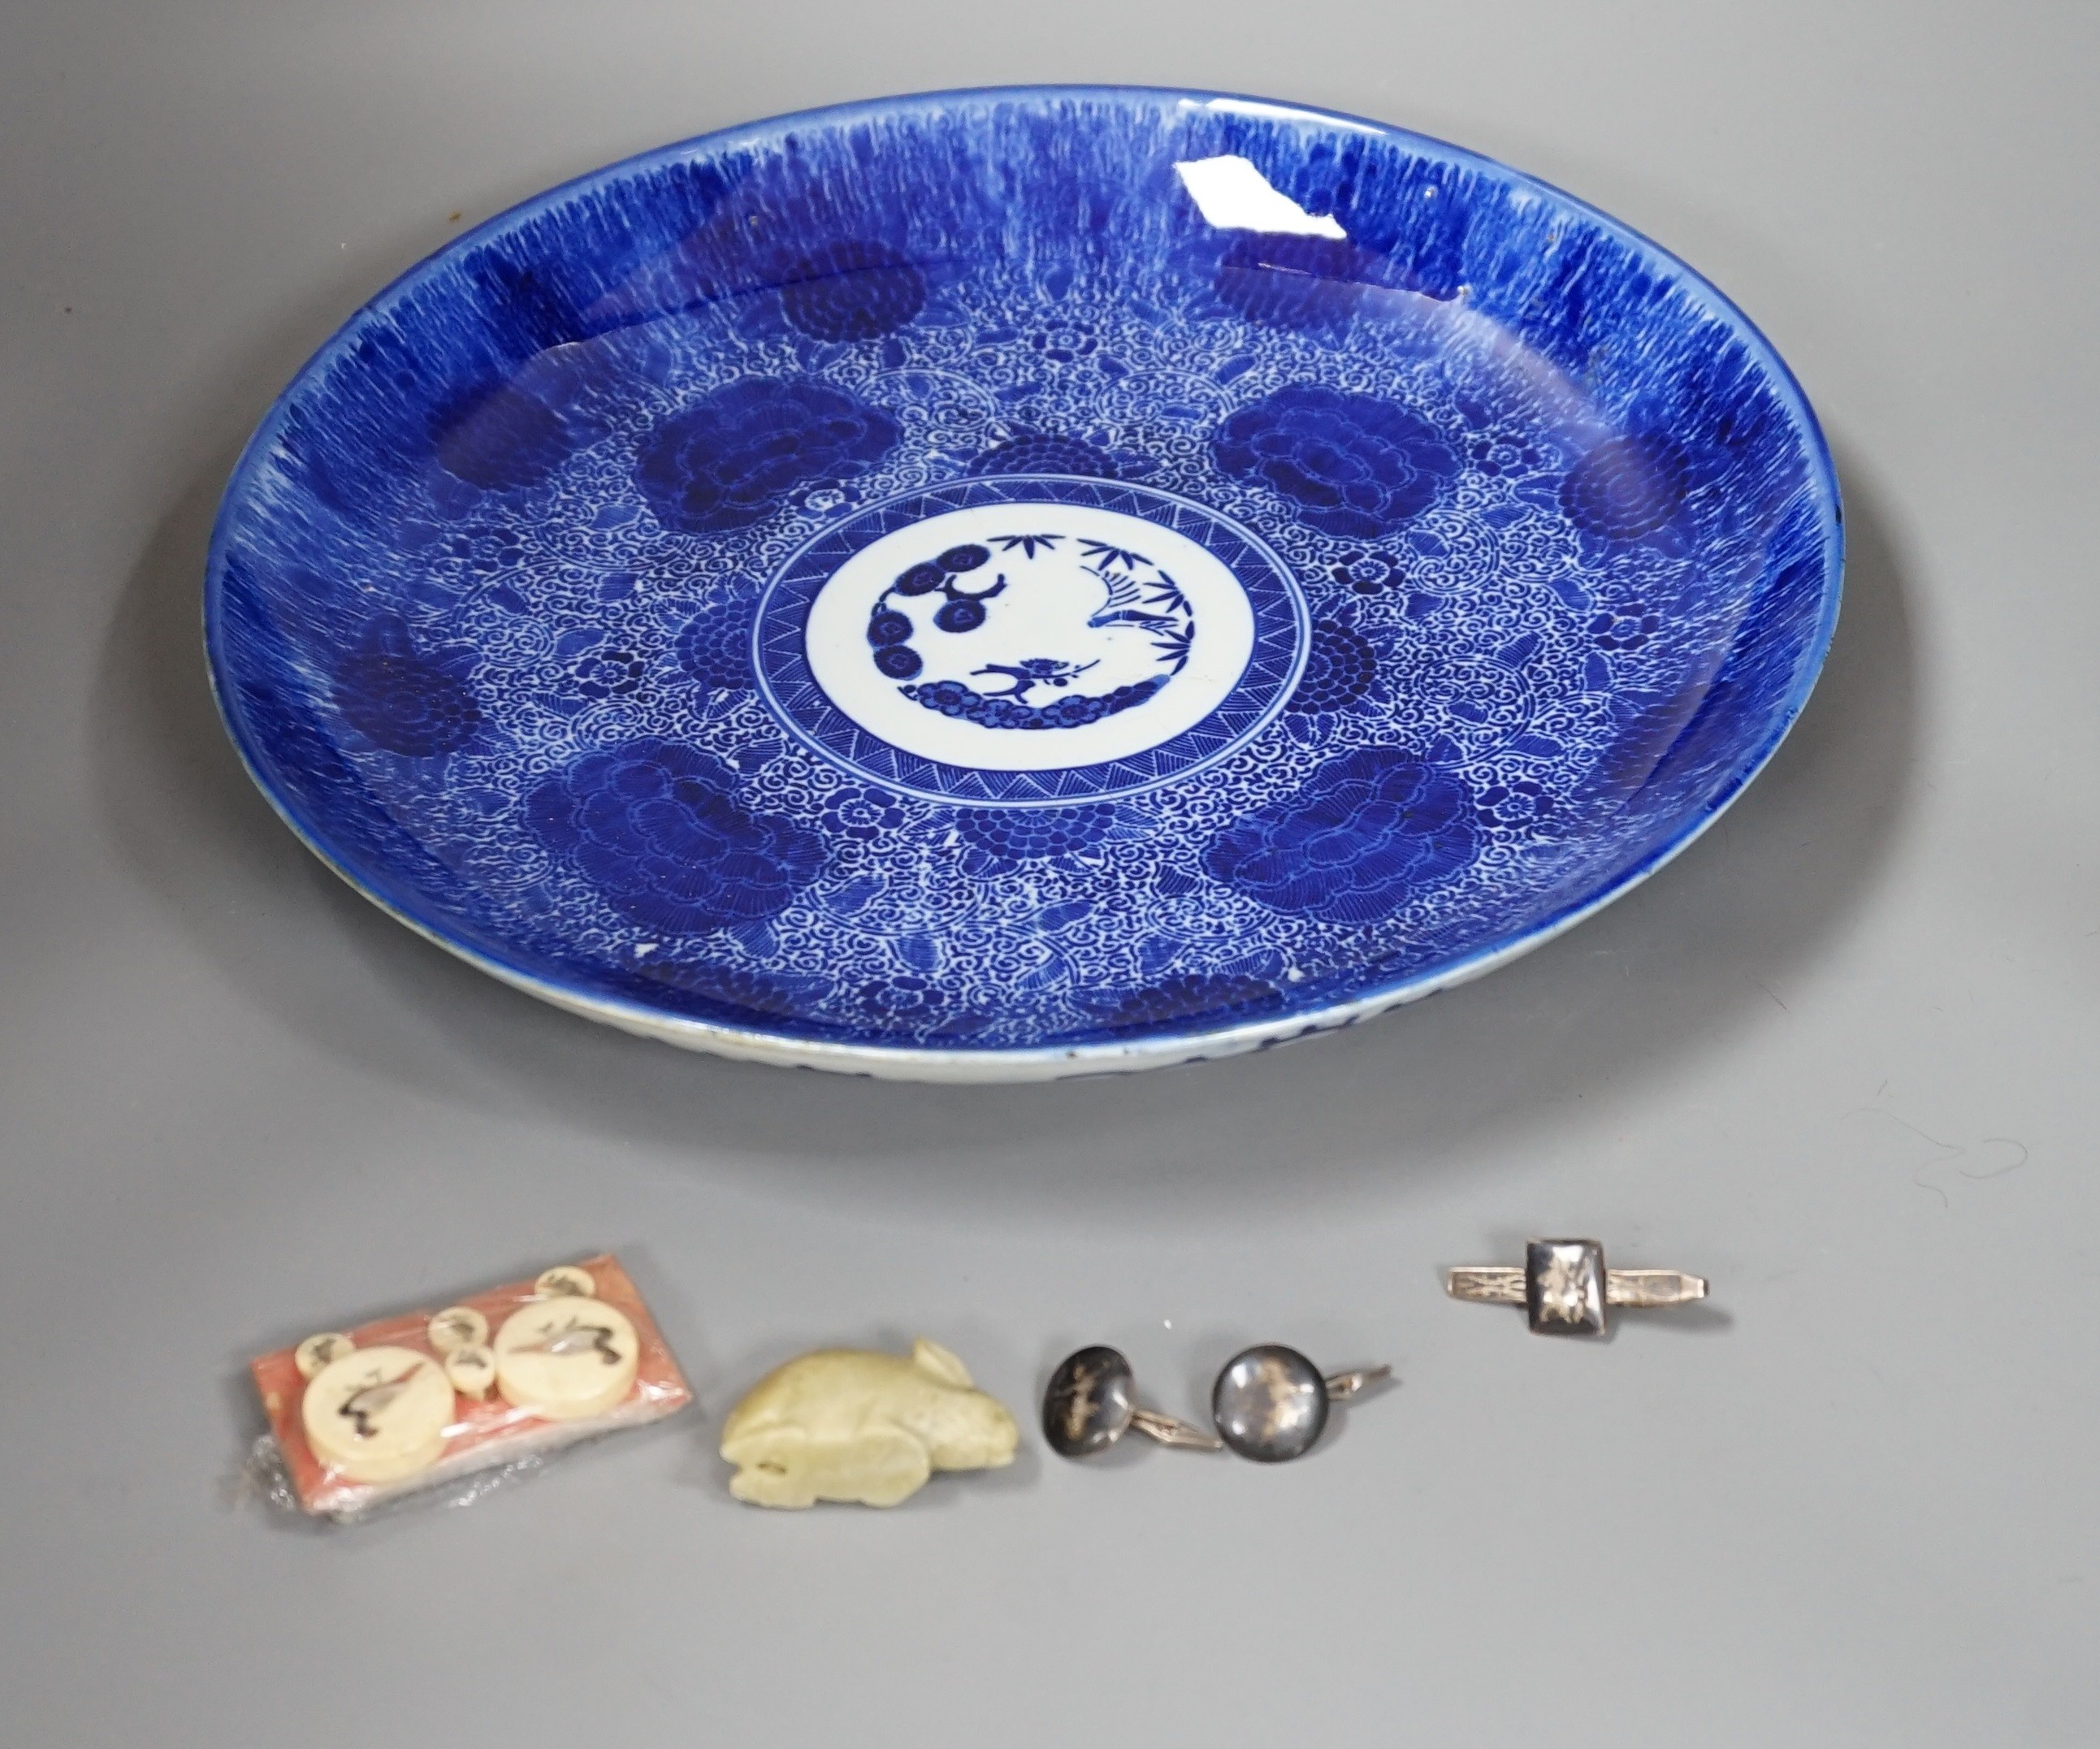 A Japanese Blue and White dish, a Set of Shibayama buttons, a soapstone rabbit, a Siamese cuff links and tie clip. Dish diameter 35cm